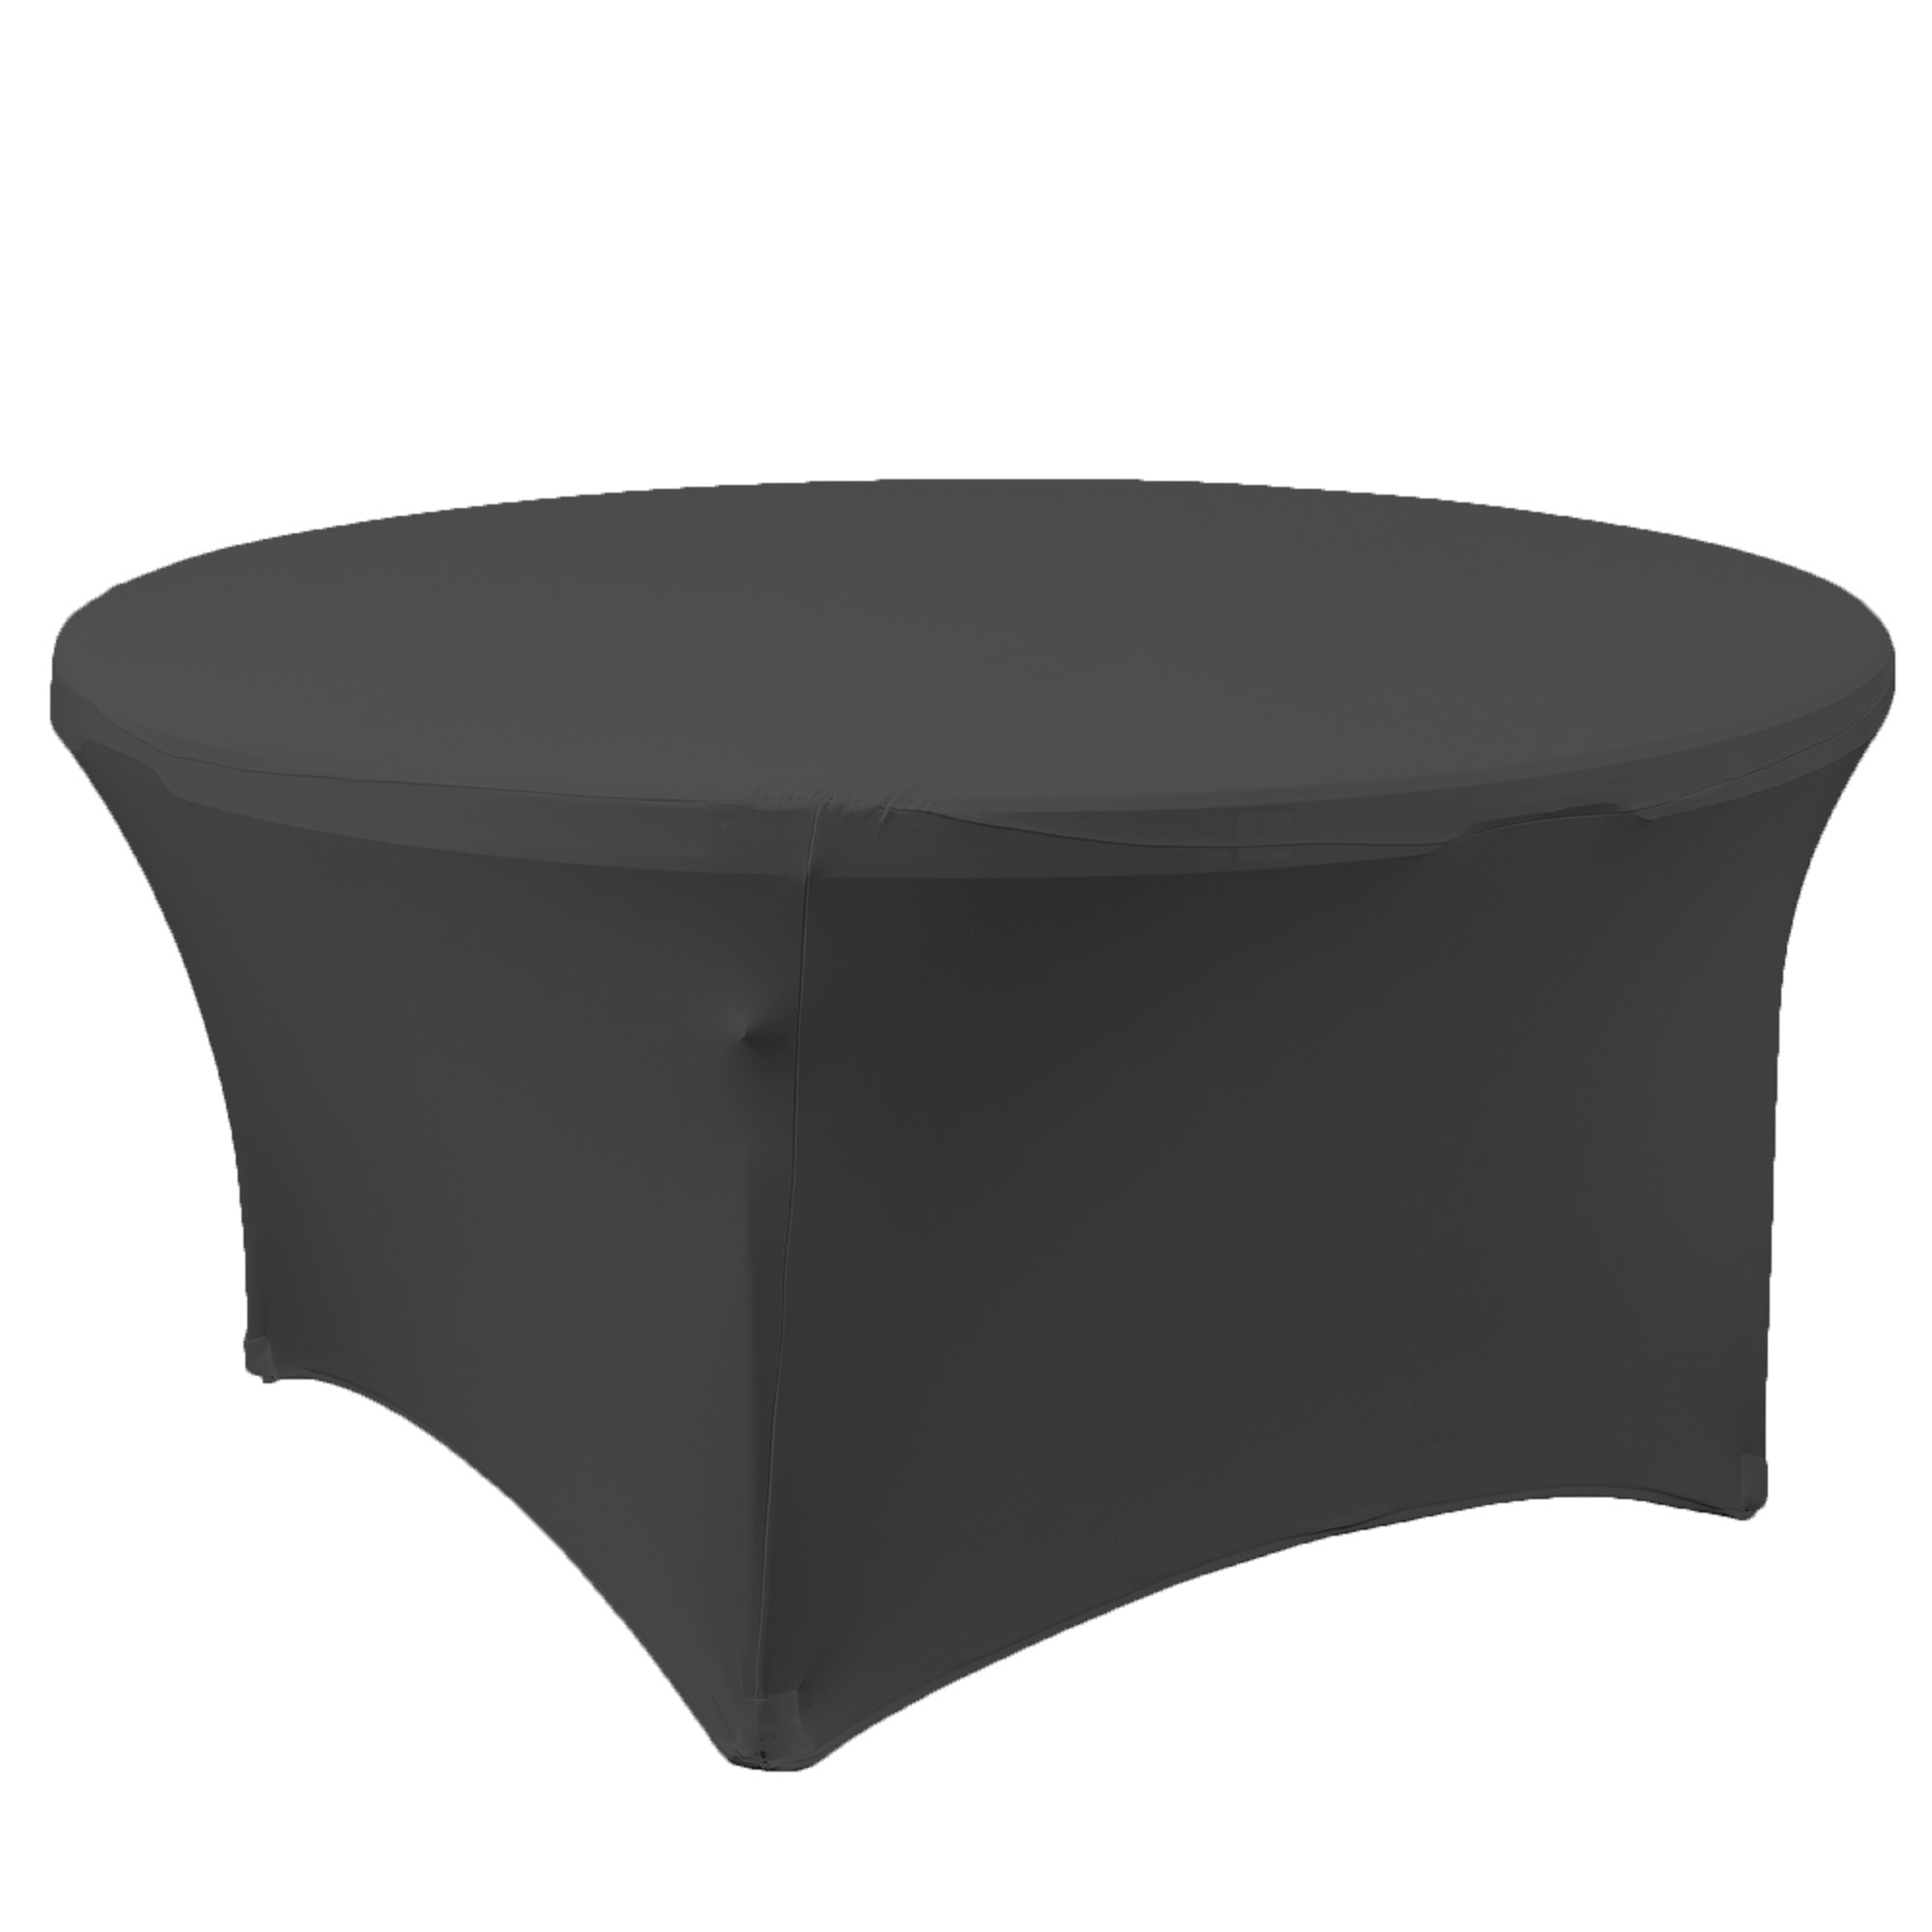 Spandex Round Table Cover 60" - Black